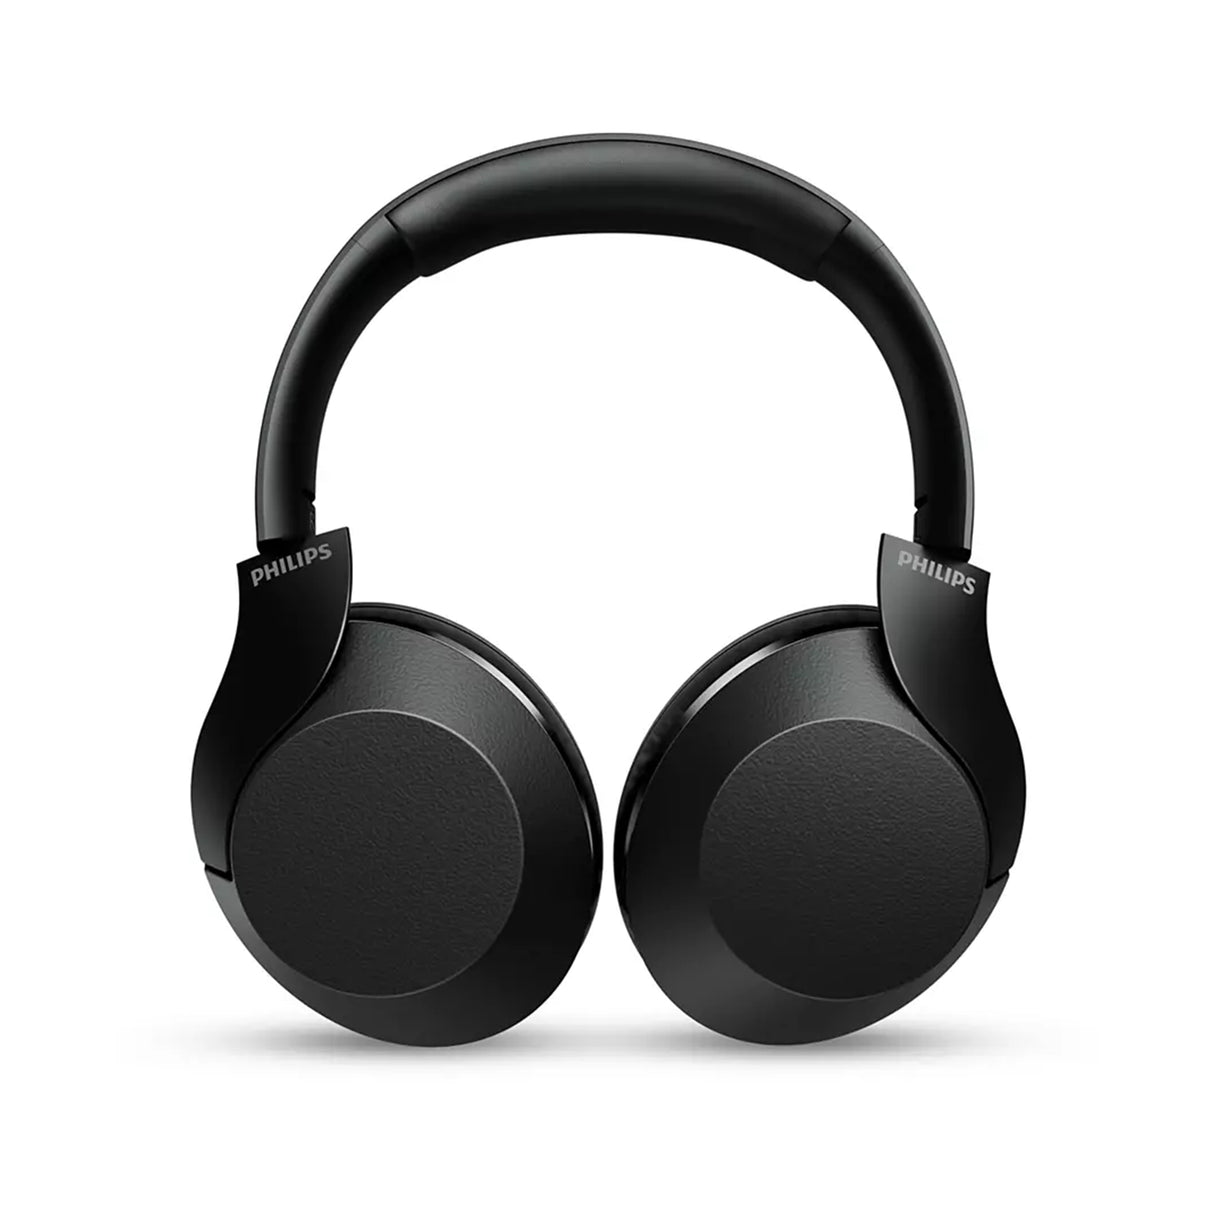 Philips TAPH802BK Hi-Res Audio Wireless Headphones with Noise Cancellation